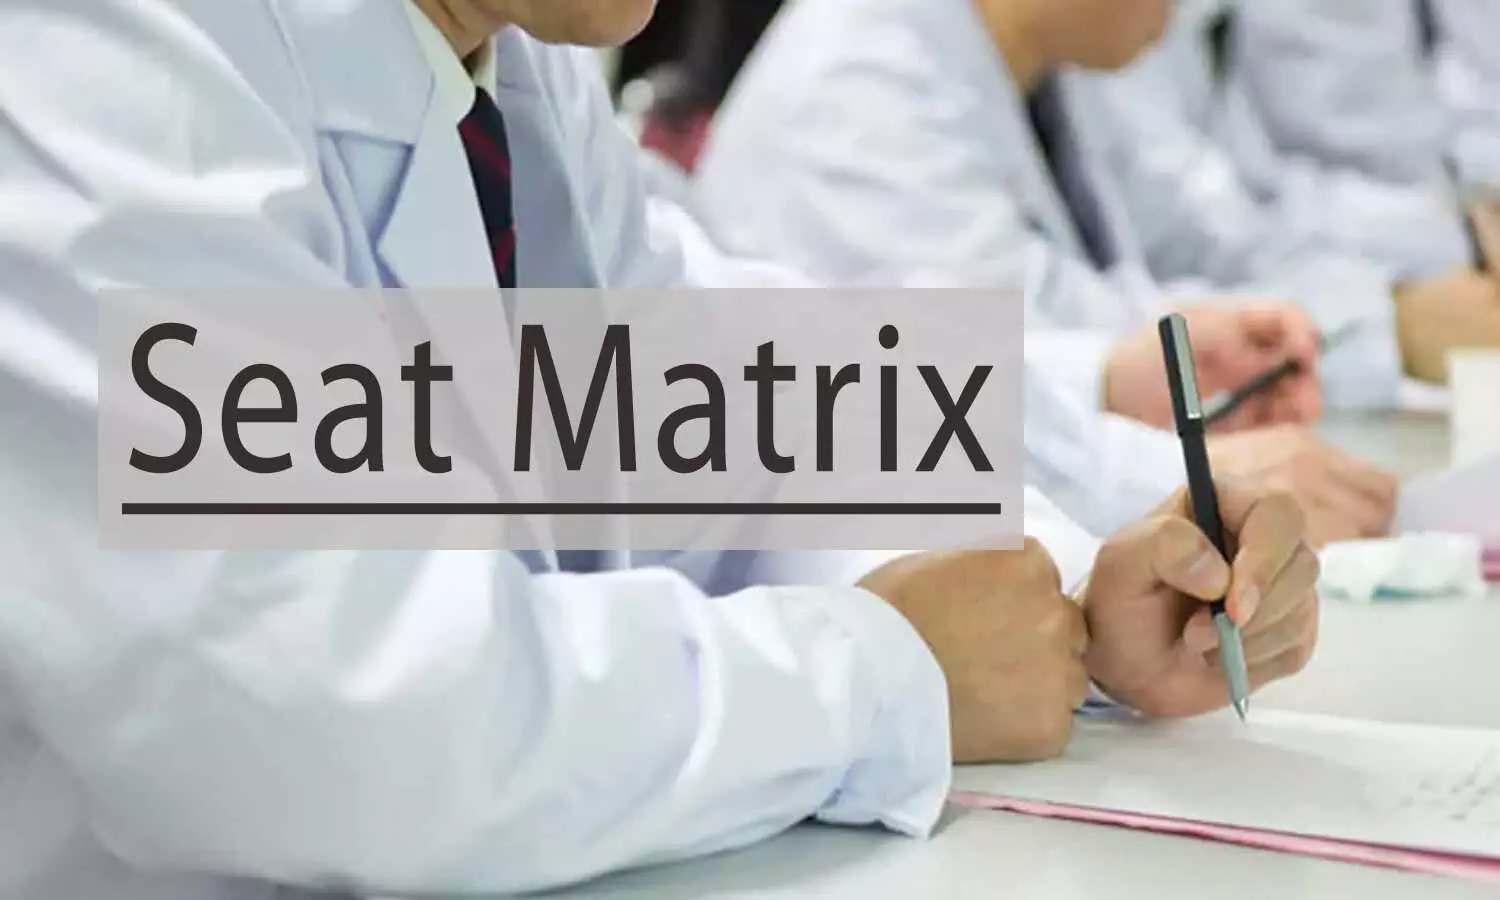 2 medical colleges added to Round 2 NEET Counselling seat matrix: MCC issues notice for MBBS candidates